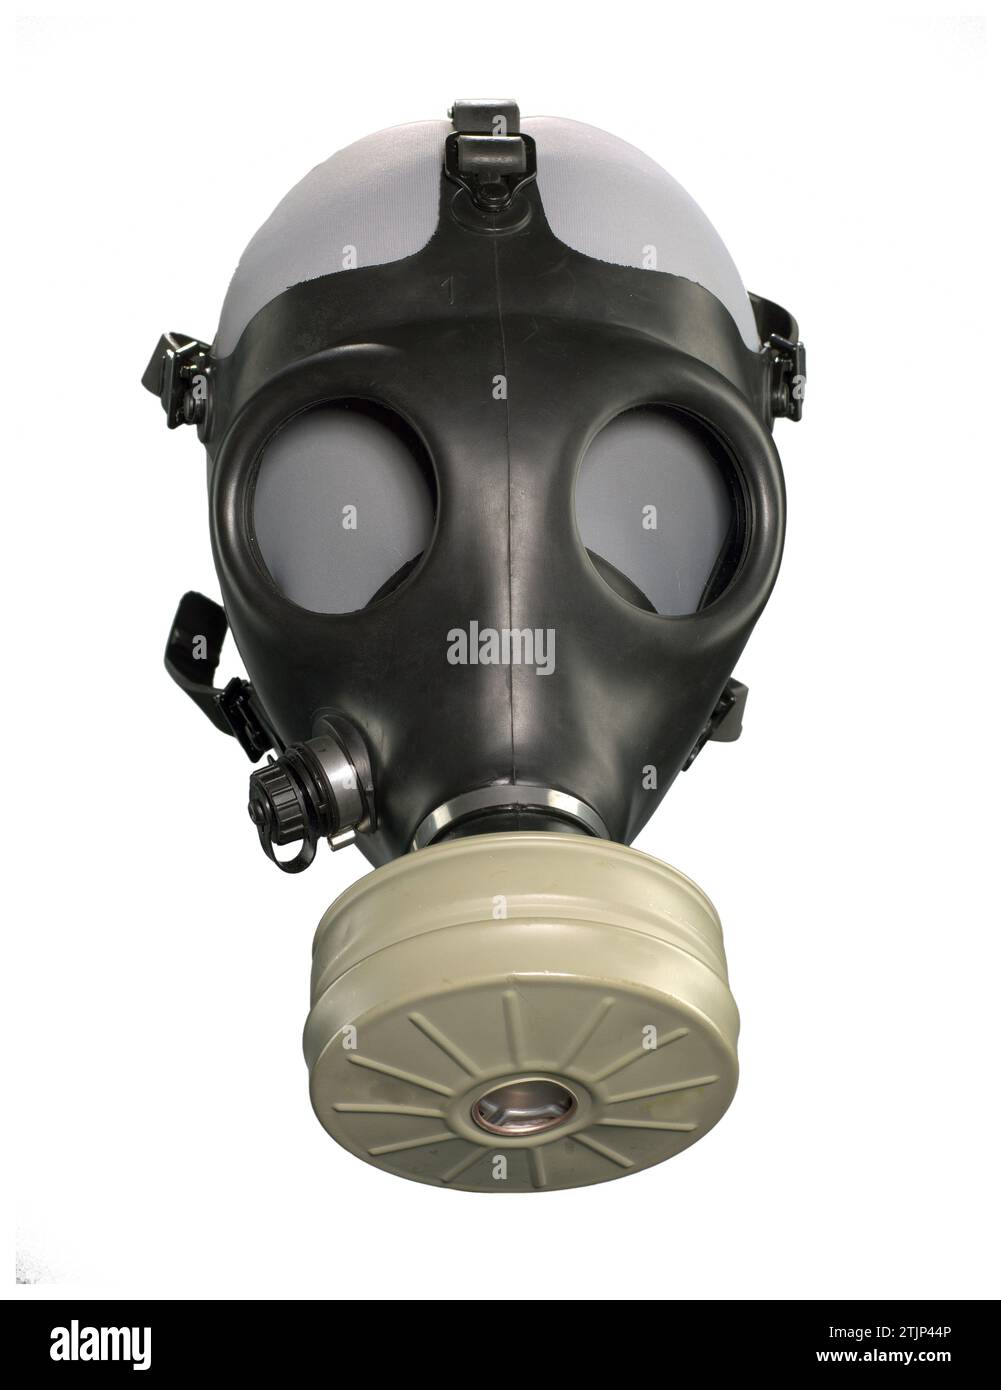 Gas mask made by Shalon Chemical Industries Ltd. Adult model 4A1. Nuclear, Biological, & Chemical (NBC), black, rubber gas mask, with a Type 80, NBC filter canister. The mask has 5 head straps with plastic buckles that secure the mask on the wearer behind the head, an interior seal, 2 plastic view lenses secured to the mask with screws, & a plastic voicemitter attached to the nose cup. There is a plastic hydration port on the proper right side of the mask  Optimised version of a photograph of an object in the Collection of the Smithsonian National Museum of African American History & Culture Stock Photo